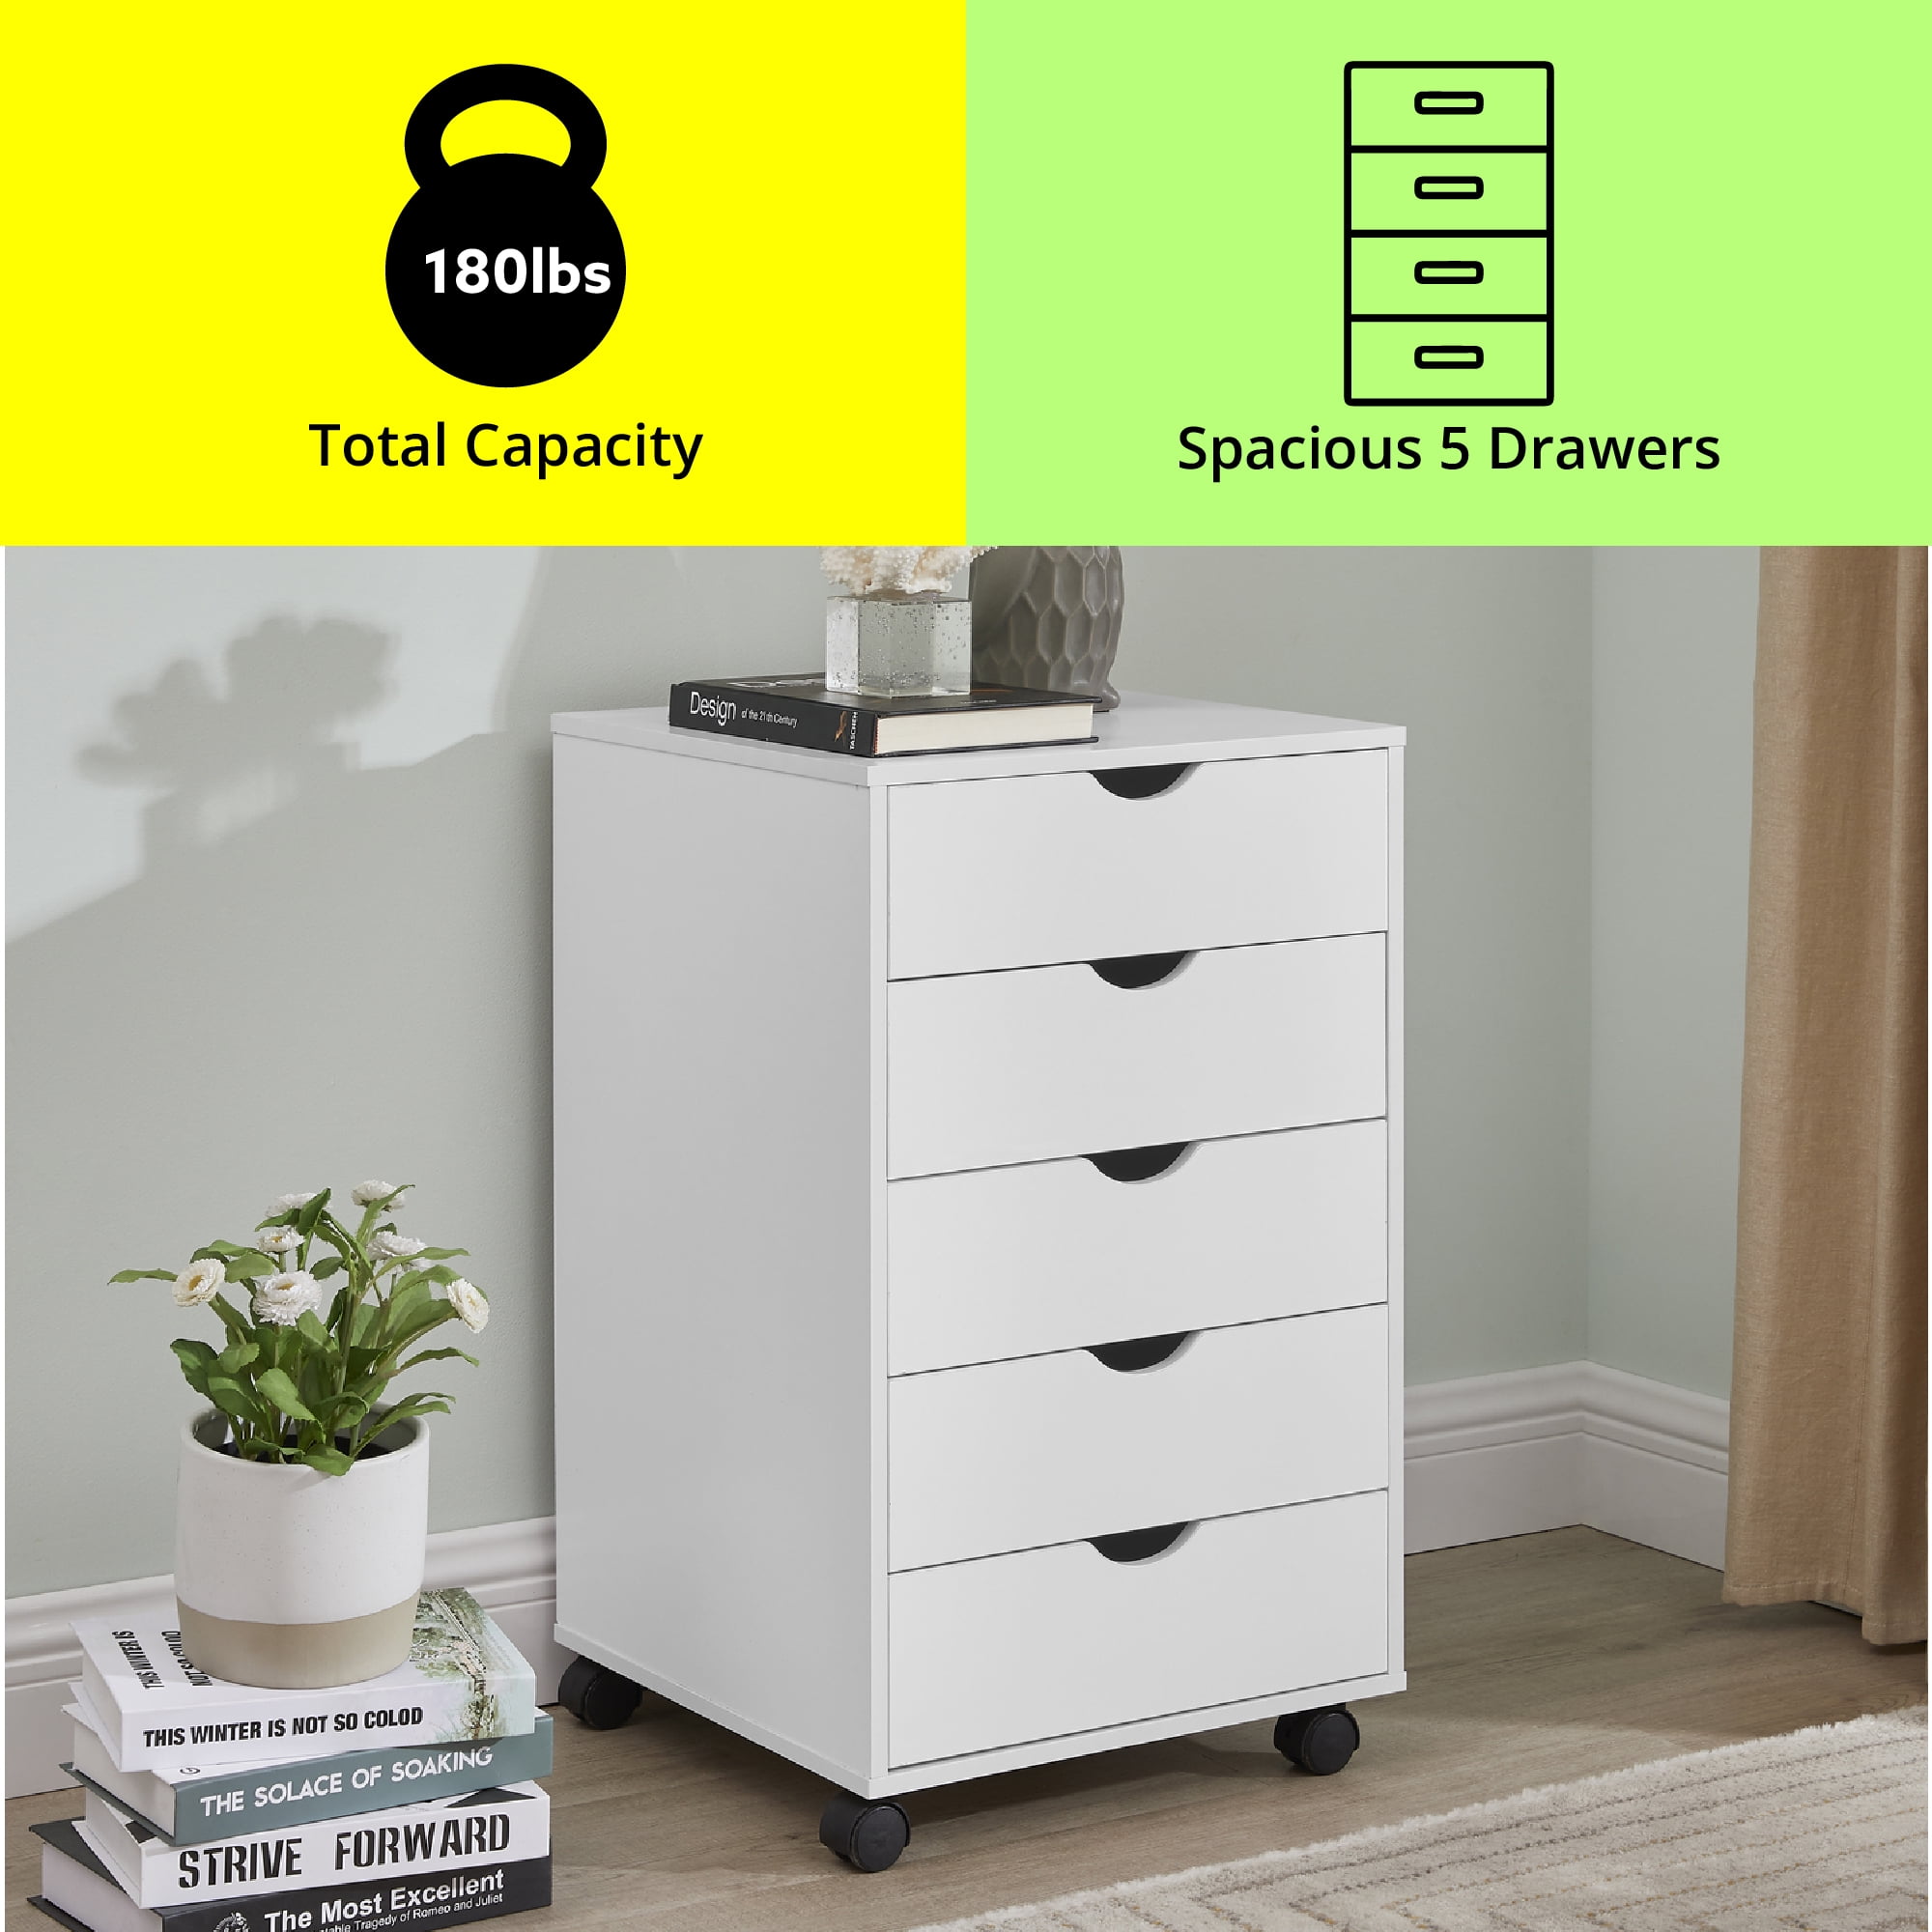 Details about   NEW 3 Drawer Chest Storage Unit For Kids Room Easy Assembled Children Furniture 